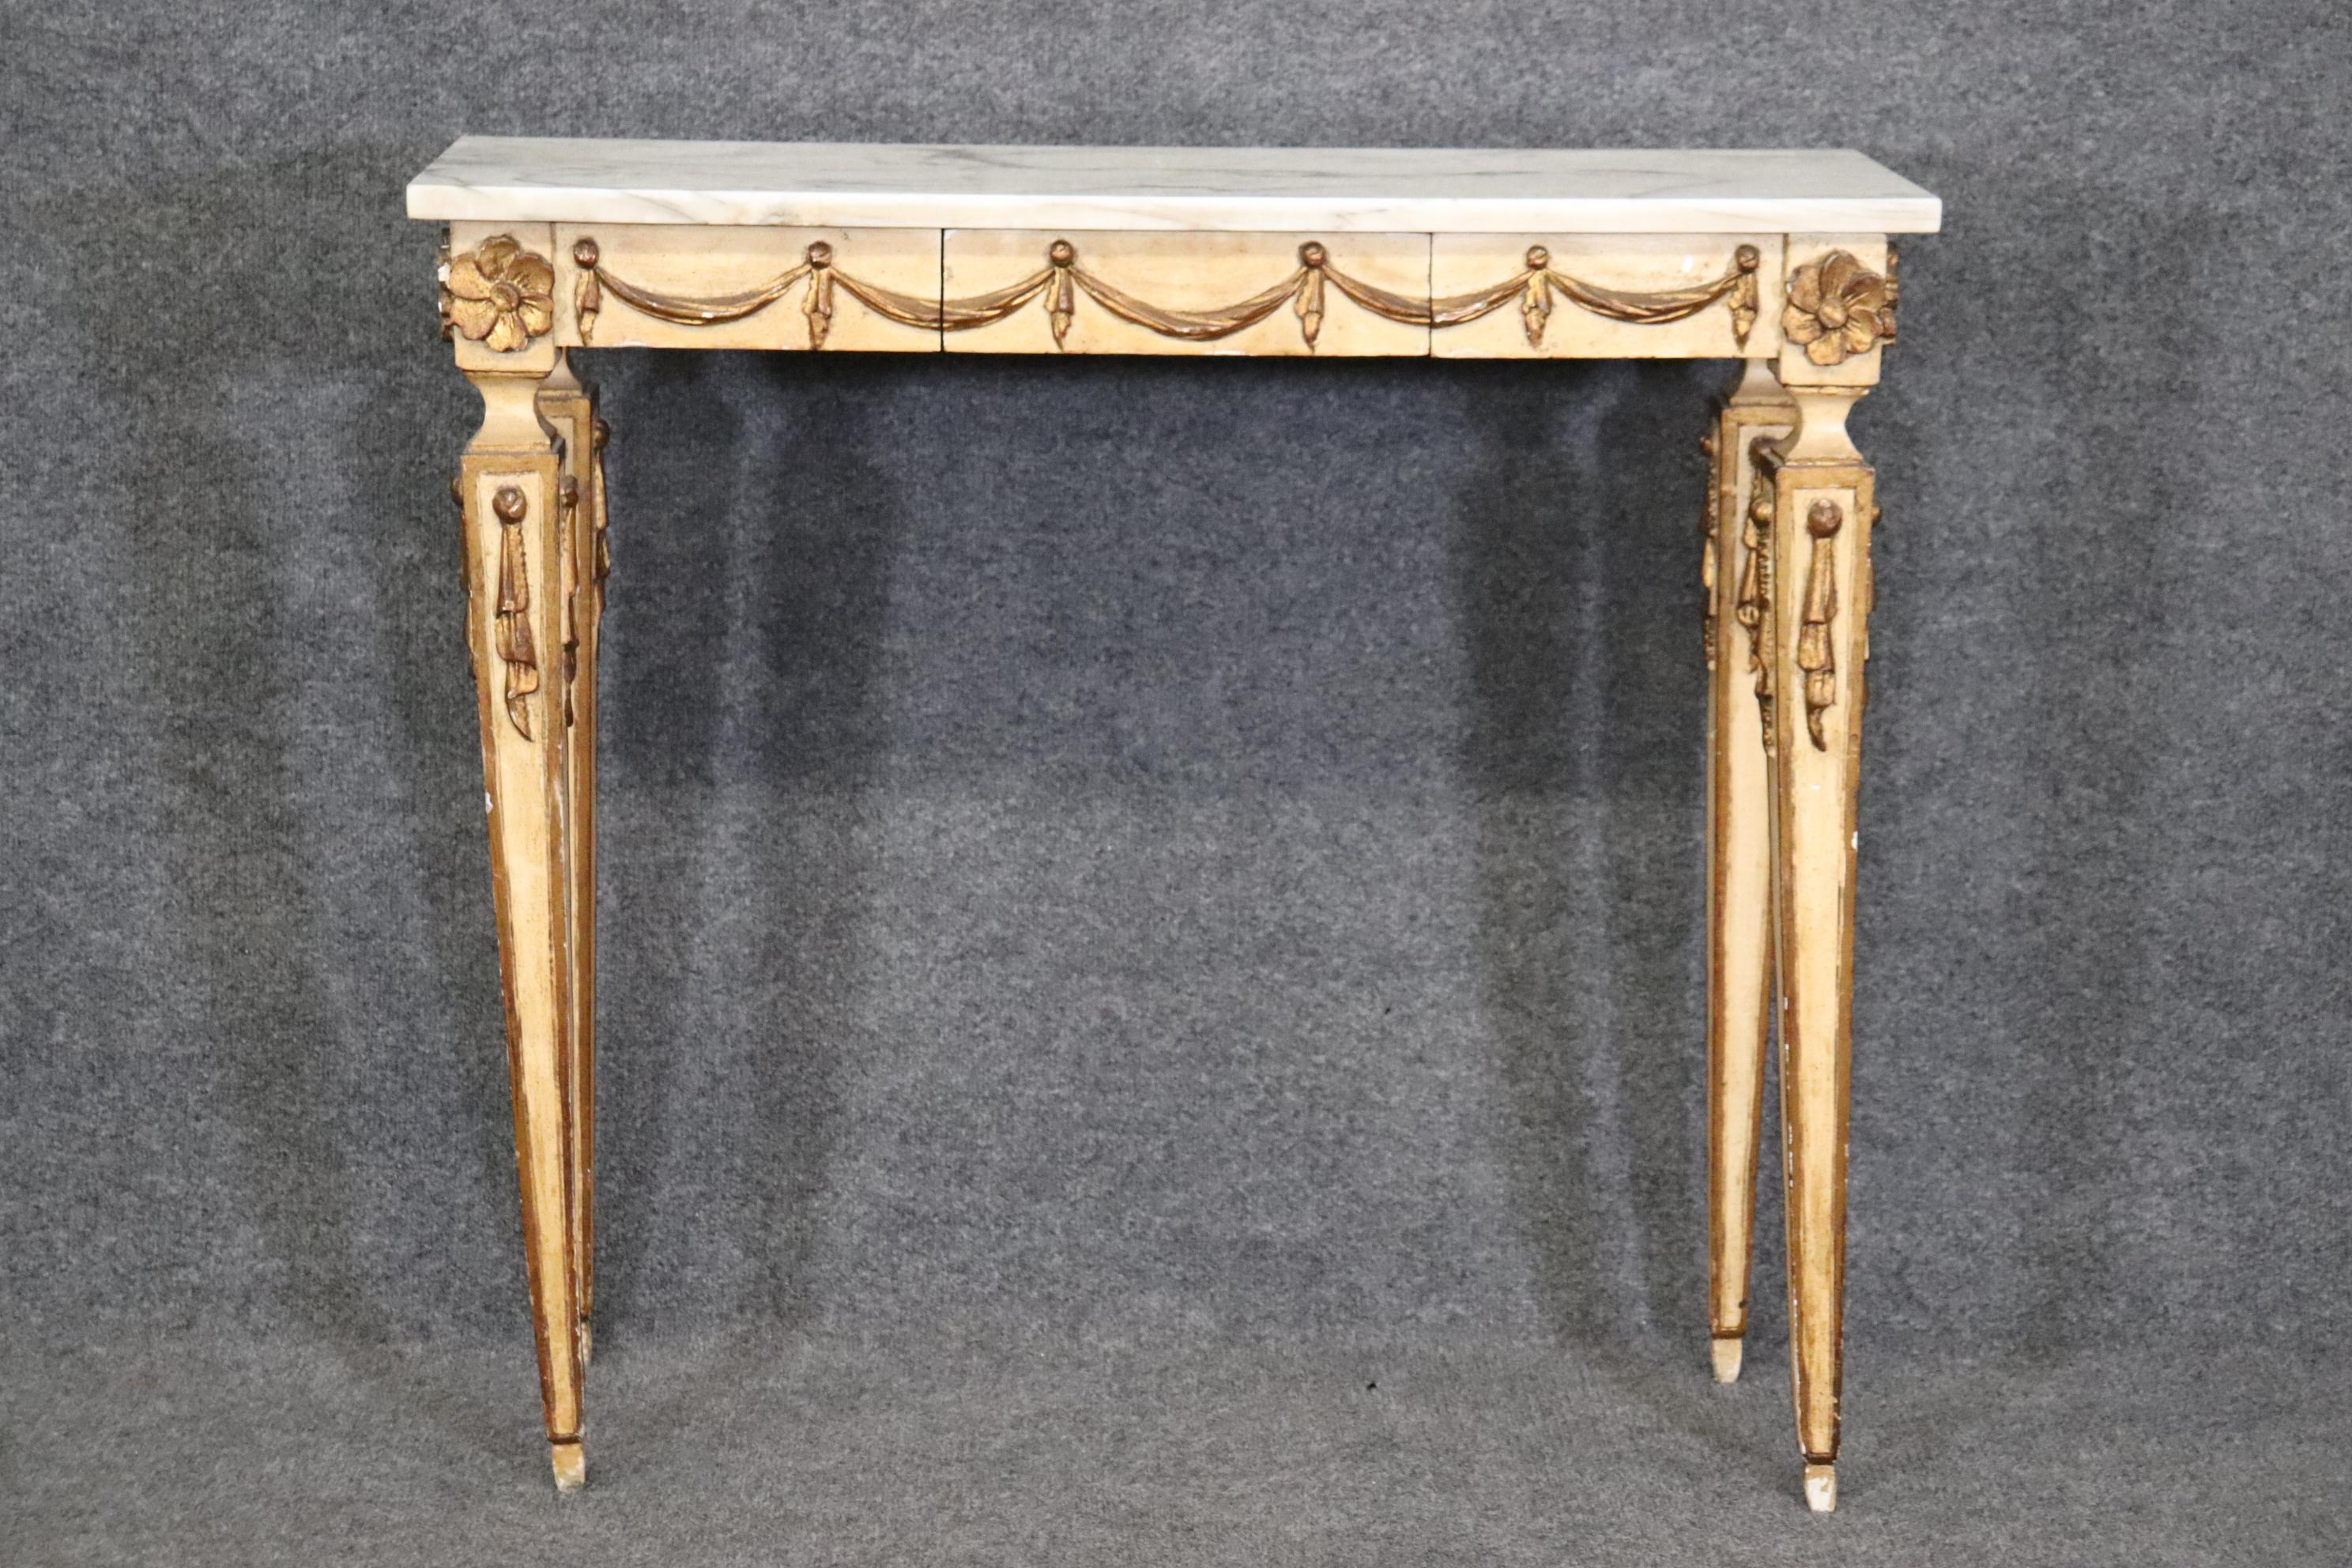 Neoclassical Revival Creme Painted Marble Top Neoclassical Style Italian Console Table with Drawer For Sale